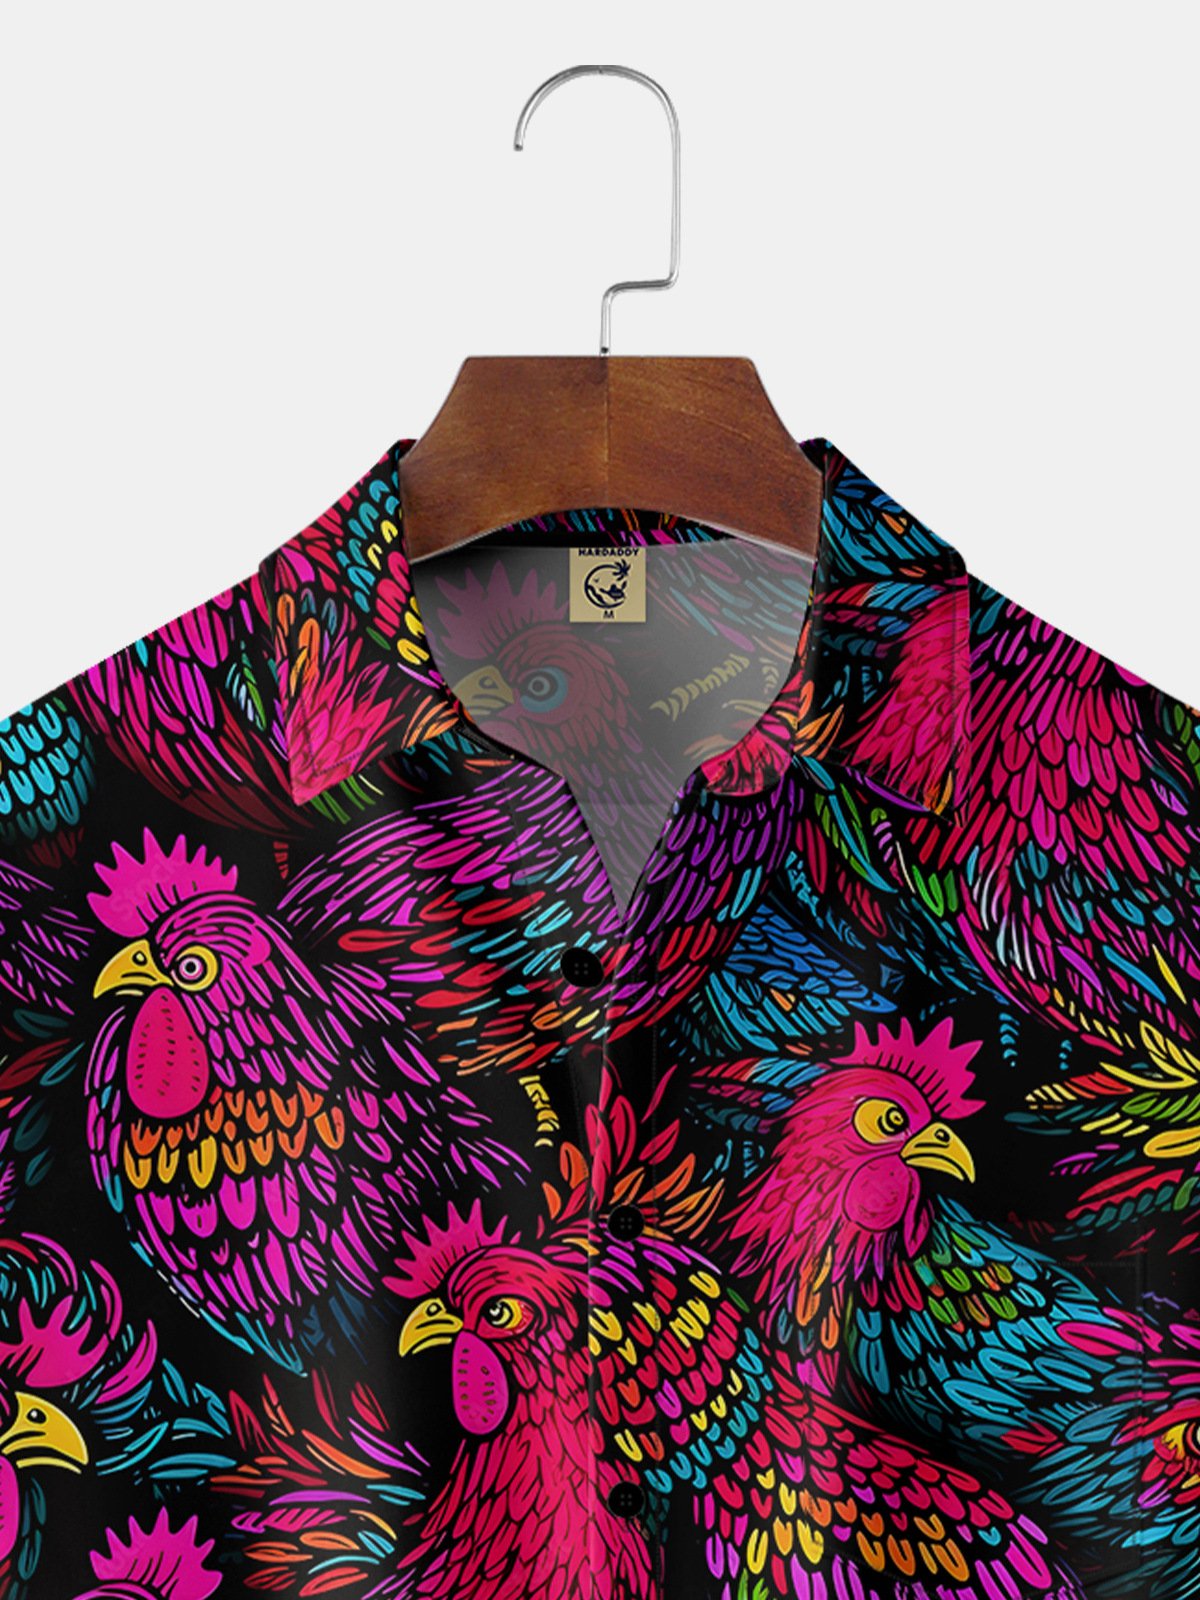 Hardaddy Rooster Art Painting Chest Pocket Short Sleeve Casual Shirt